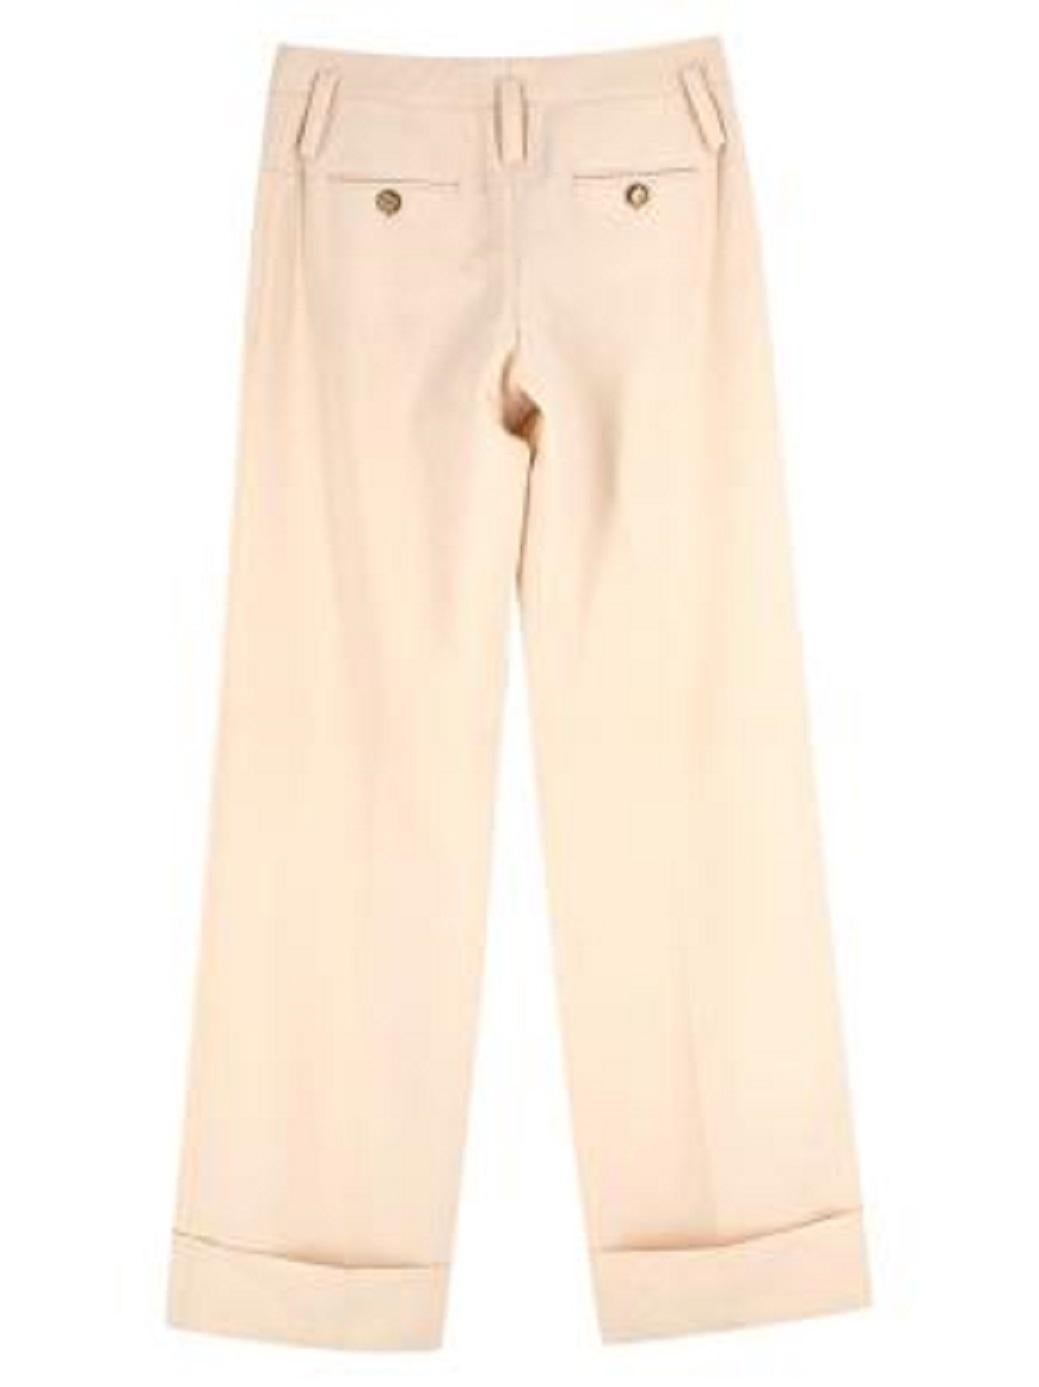 Celine Cream Wide Leg Cuffed Tailored Trousers In Good Condition For Sale In London, GB